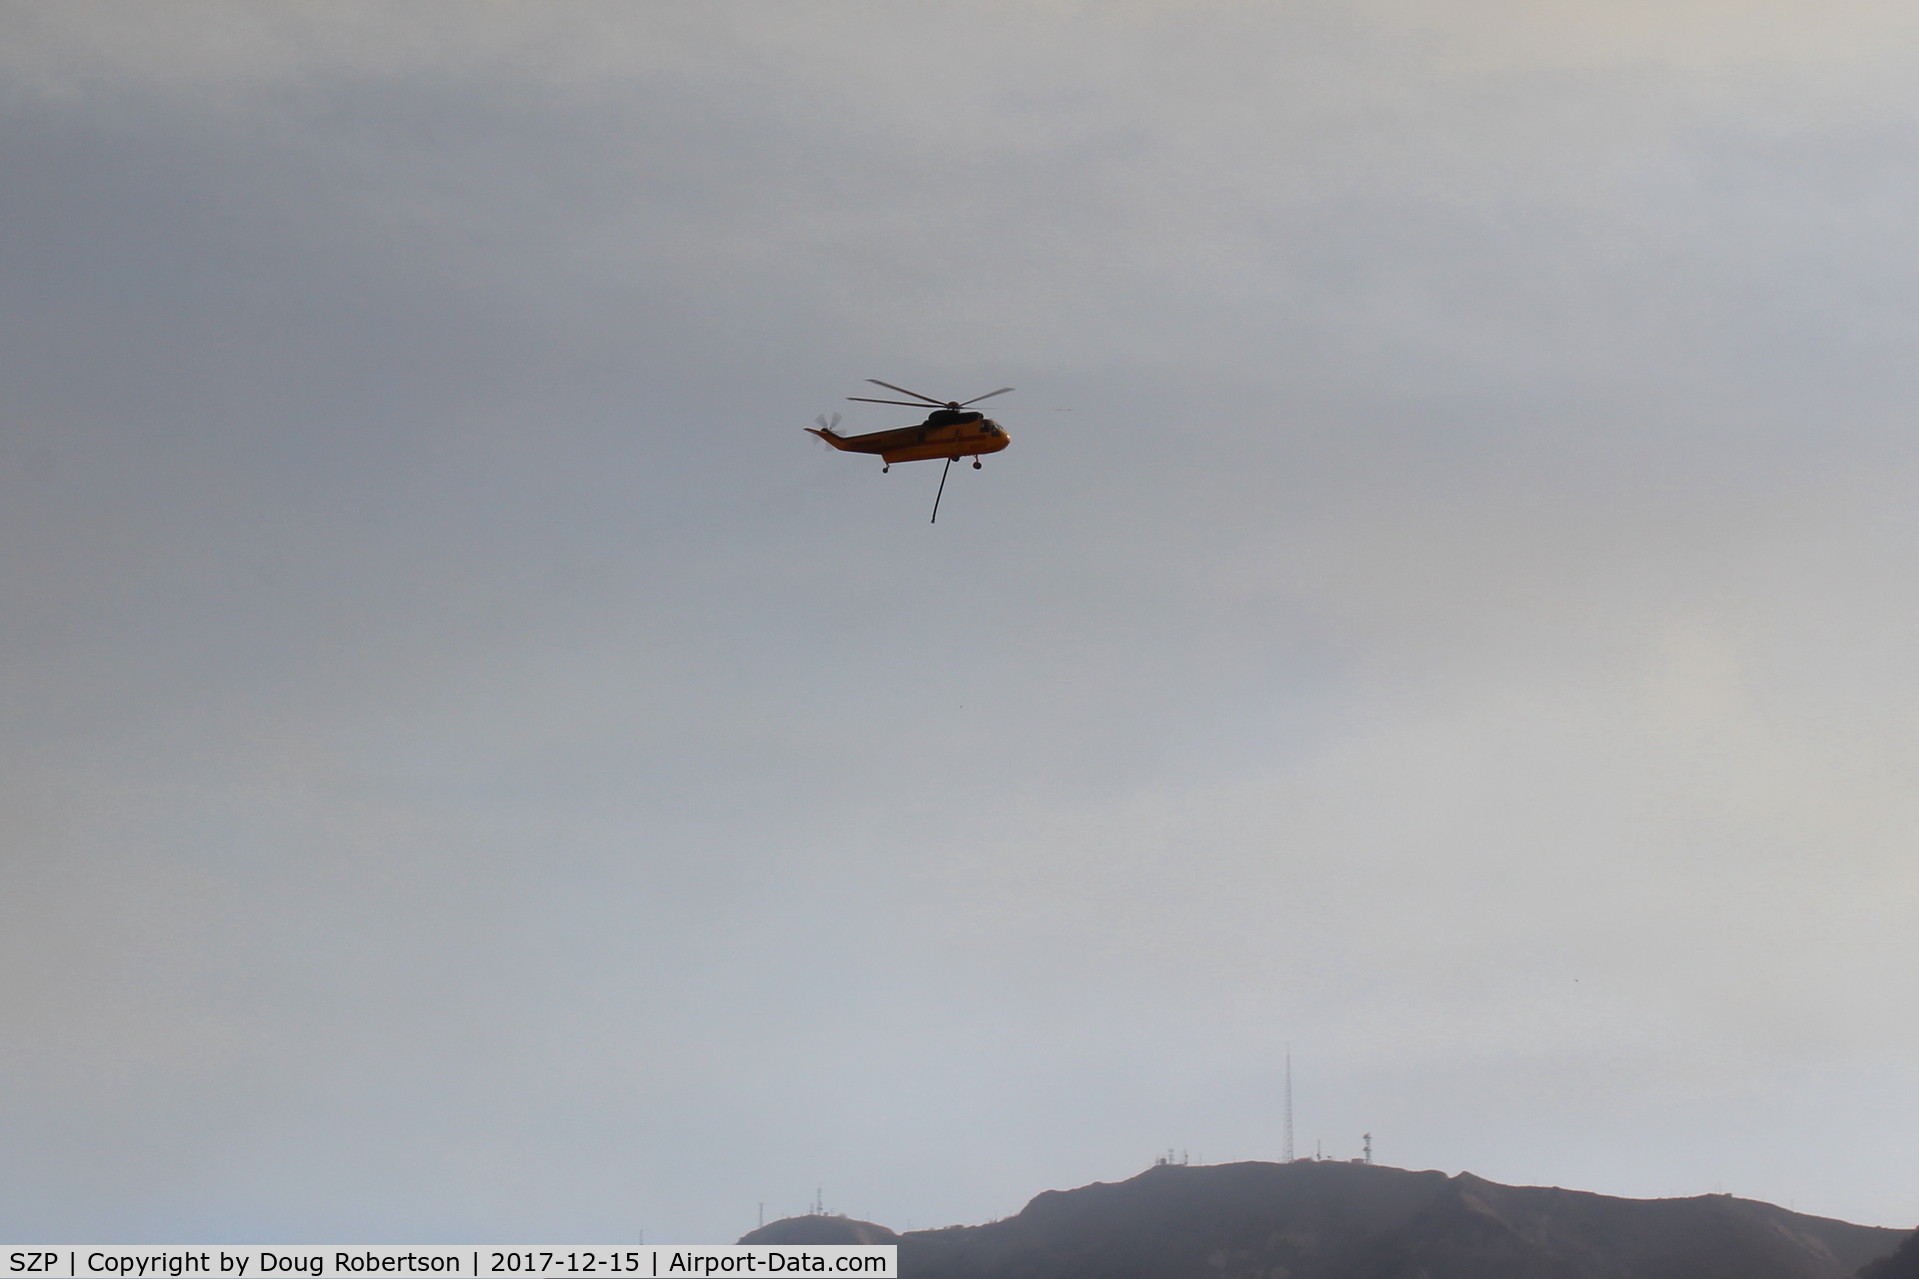 Santa Paula Airport (SZP) - CROMAN helicopter with Phos Chek sling load dumped, returning to SZP Firebase